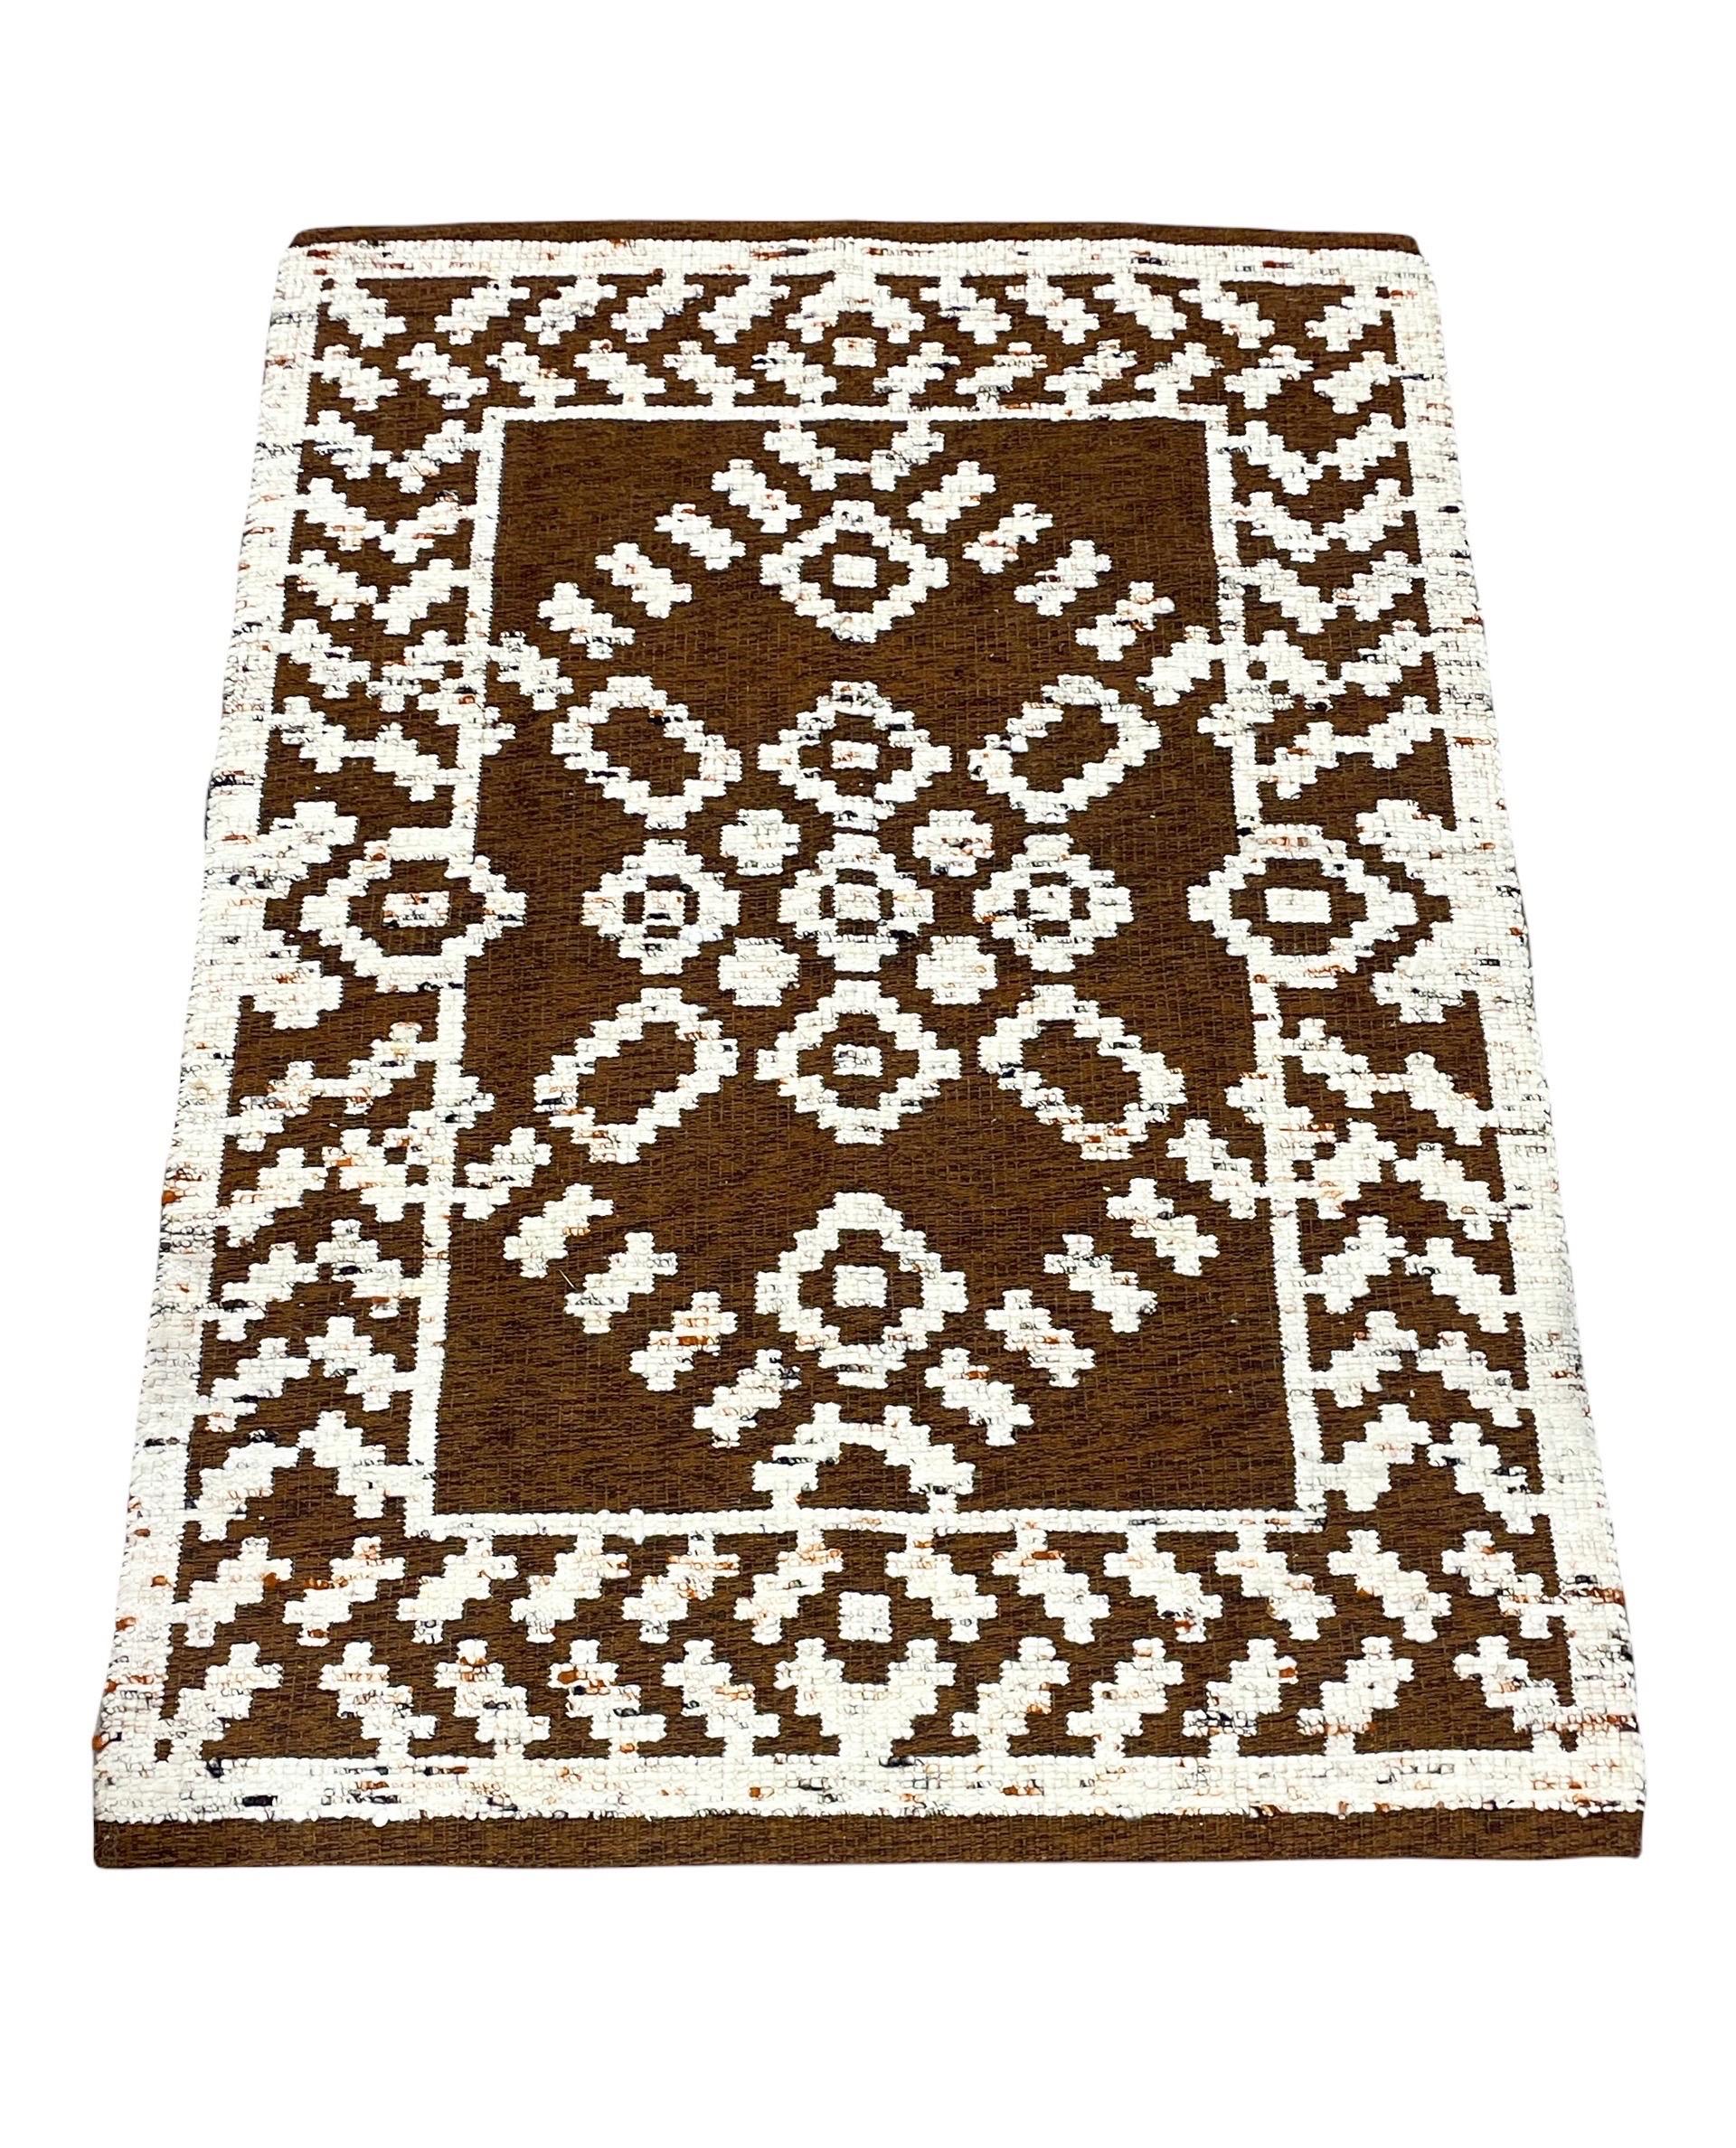 Mid-century Scandinavian Modern hand knotted wool area rug by Astrid Sampe for Tabergs, Sweden circa 1970s. Reversible design. Warm chocolate browns and creamy whites with hints of oranges and black.

This rug is NOS (New Old Stock). It has never